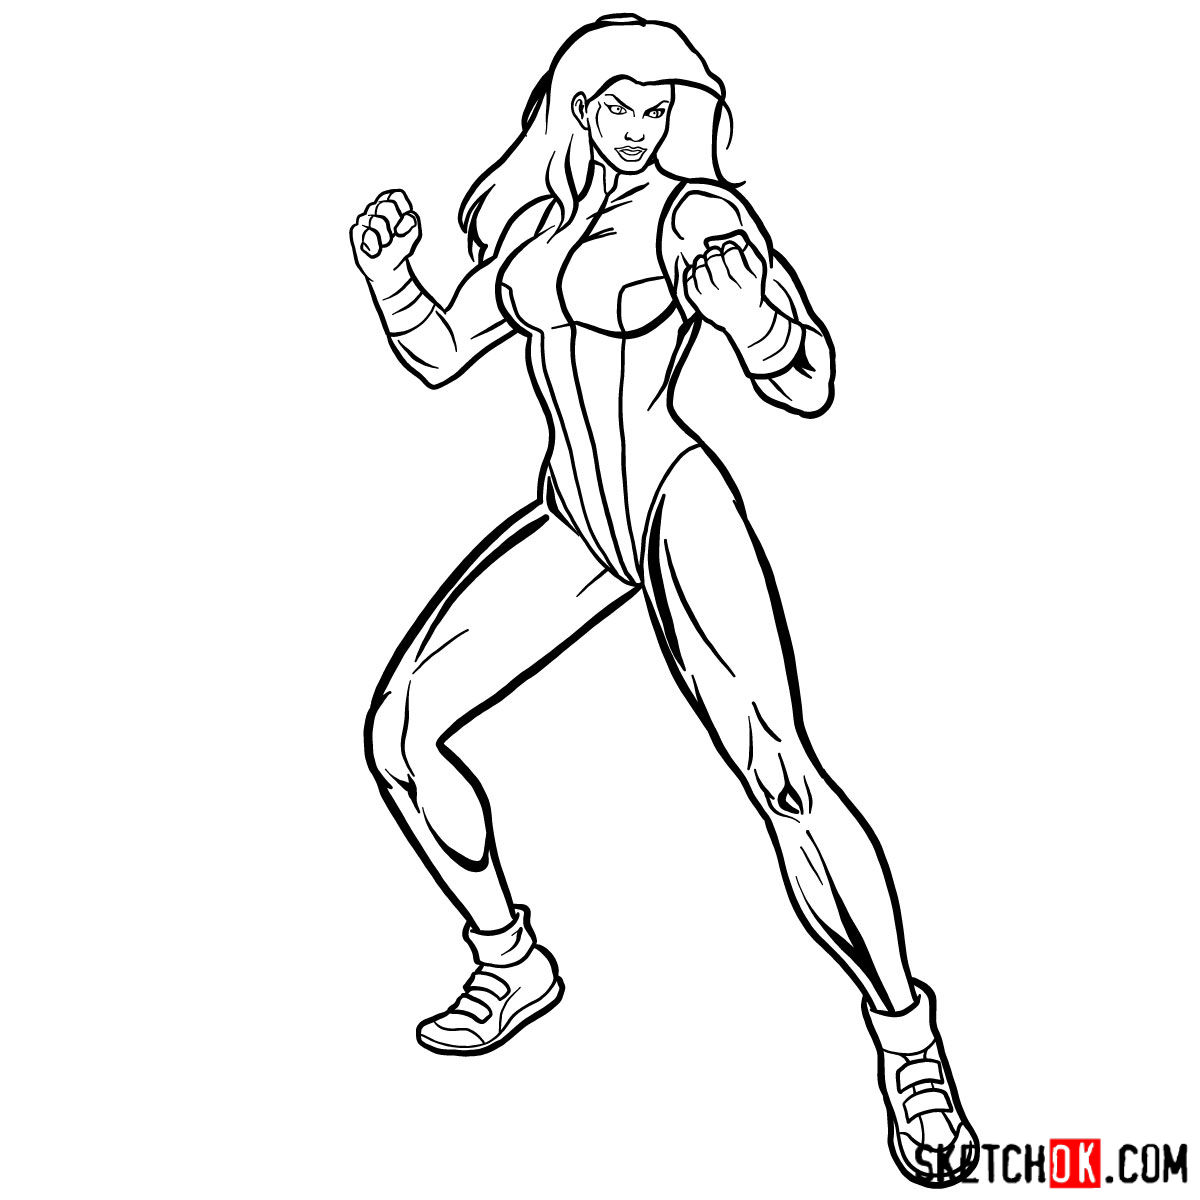 How to draw She-Hulk (Jennifer Walters) from Marvel - Step by step ...